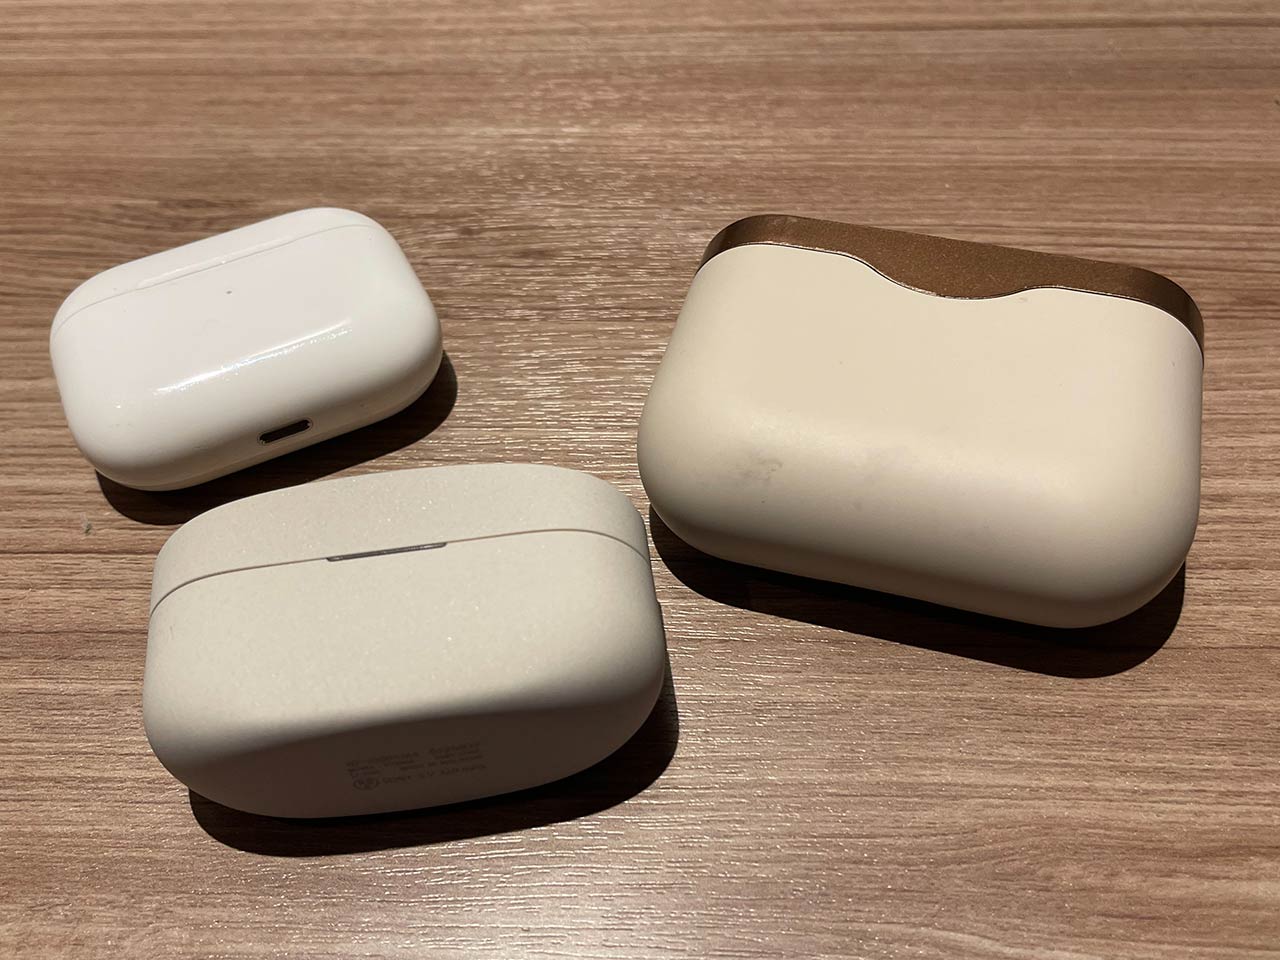 ▲ Compare AirPods Pro (top left), XM3 (right), XM4 (bottom left). The case size has changed a lot.